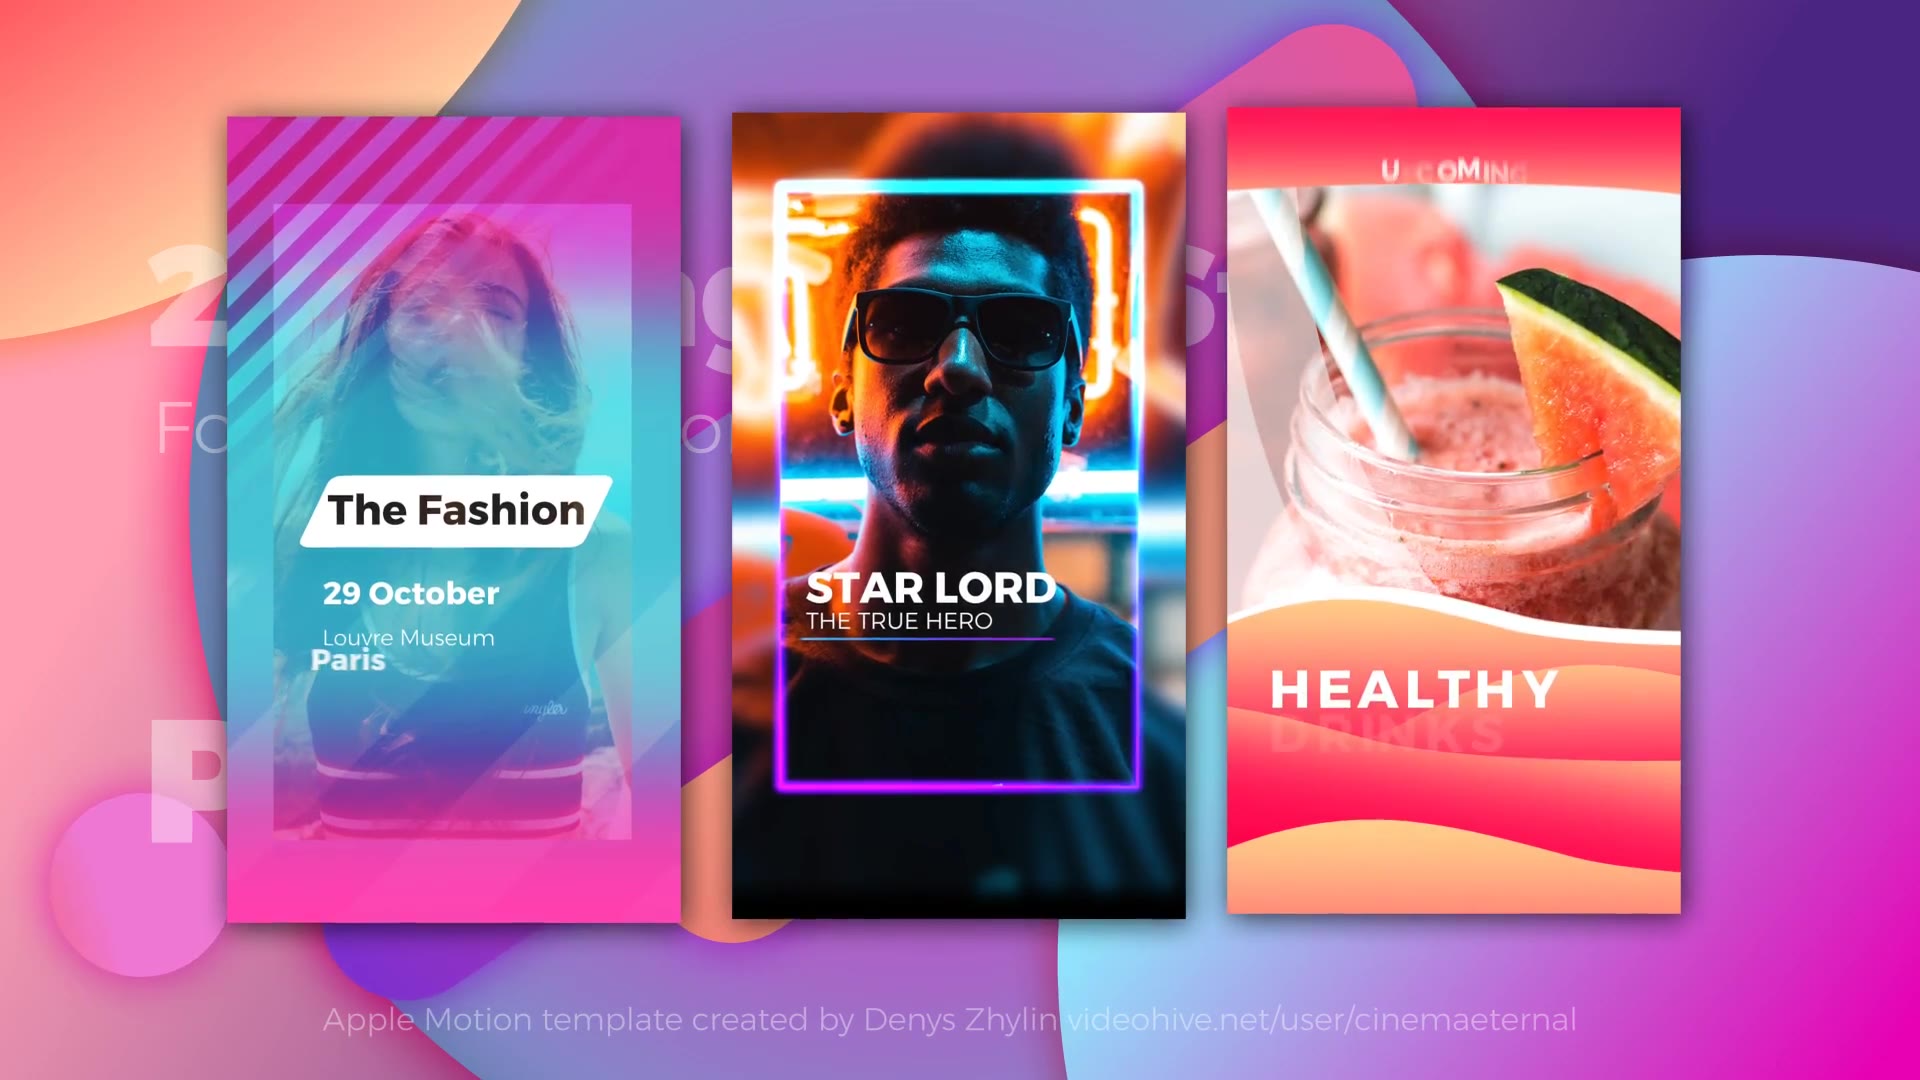 Instagram Stories for Apple Motion and FCPX Part 2 - Download Videohive 22785014